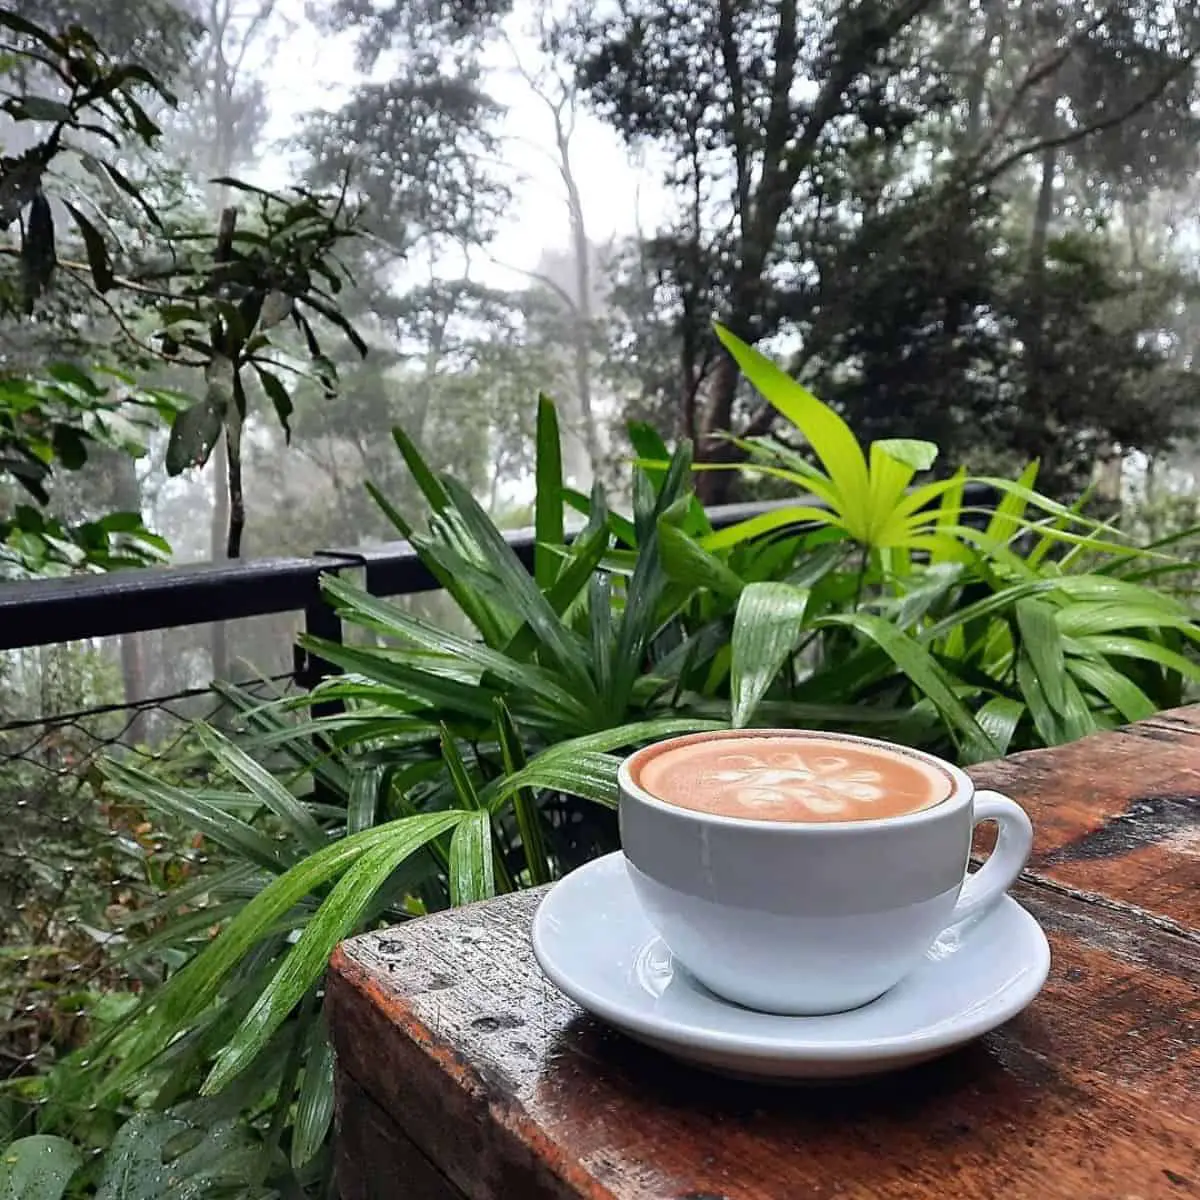 Kommune luscious cup of coffee with a green scenery in Penang Hill